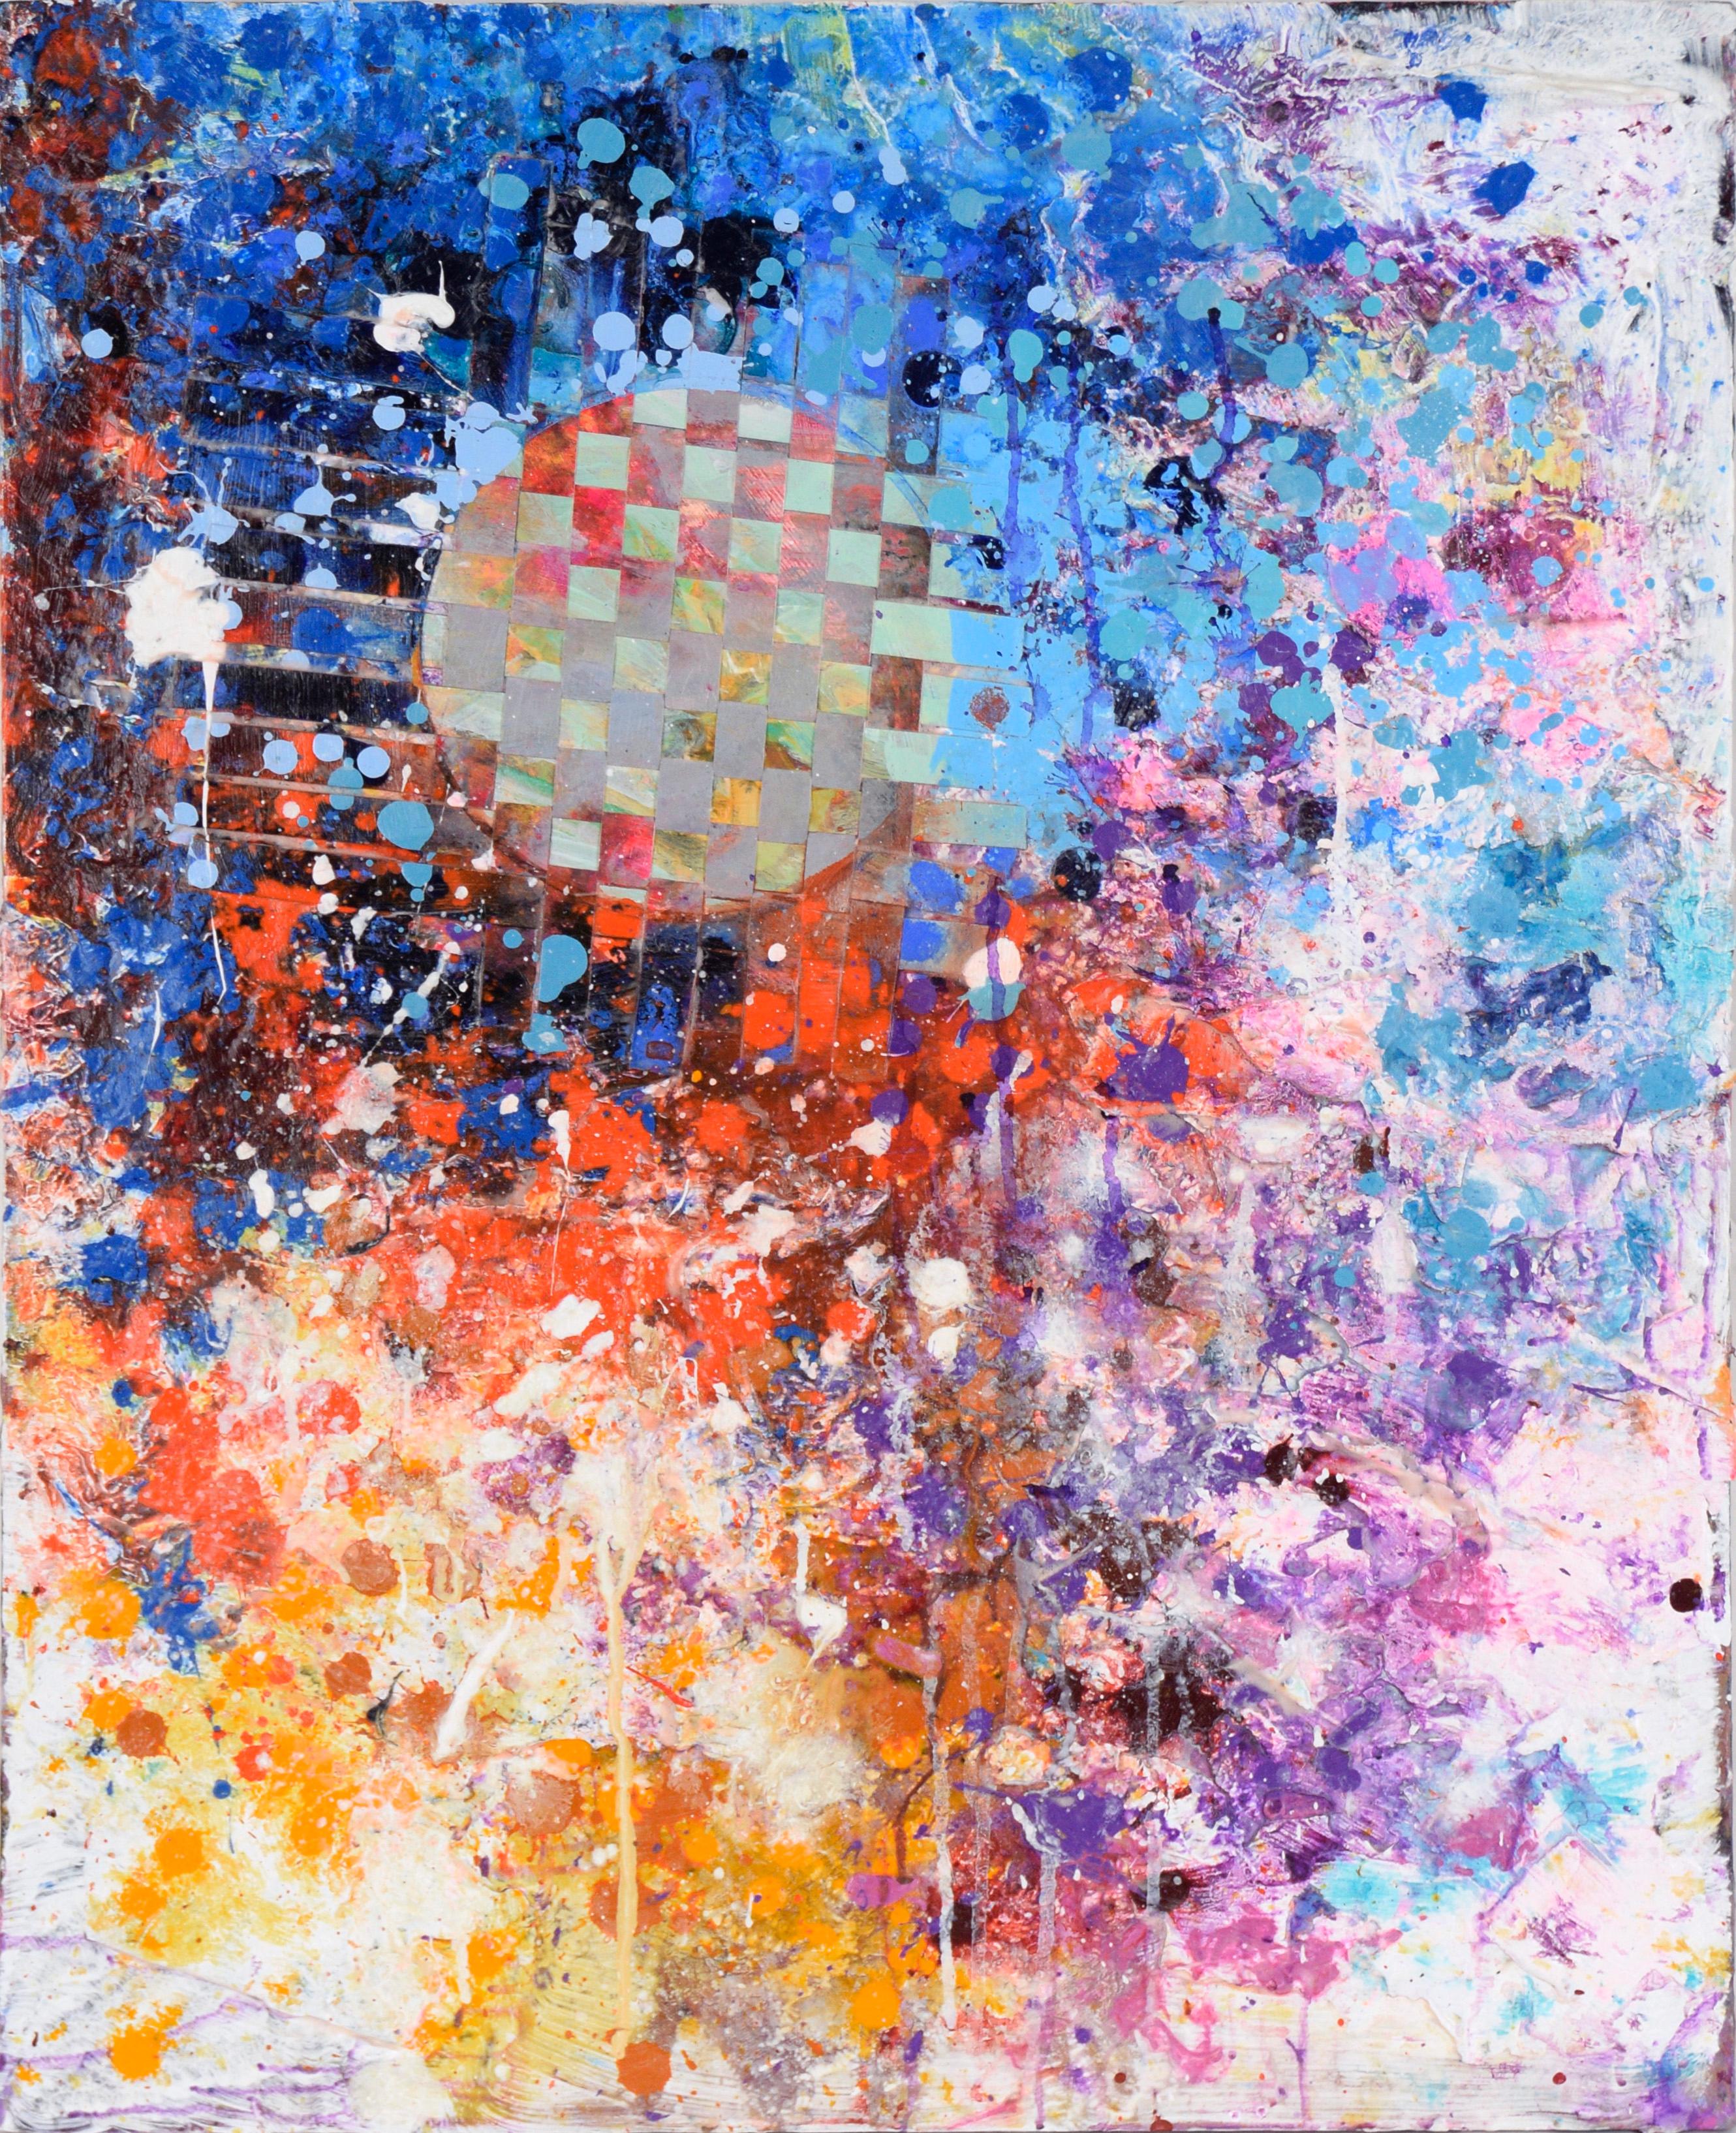 Woven Moon - Abstract Expressionist Composition in Acrylic on Canvas